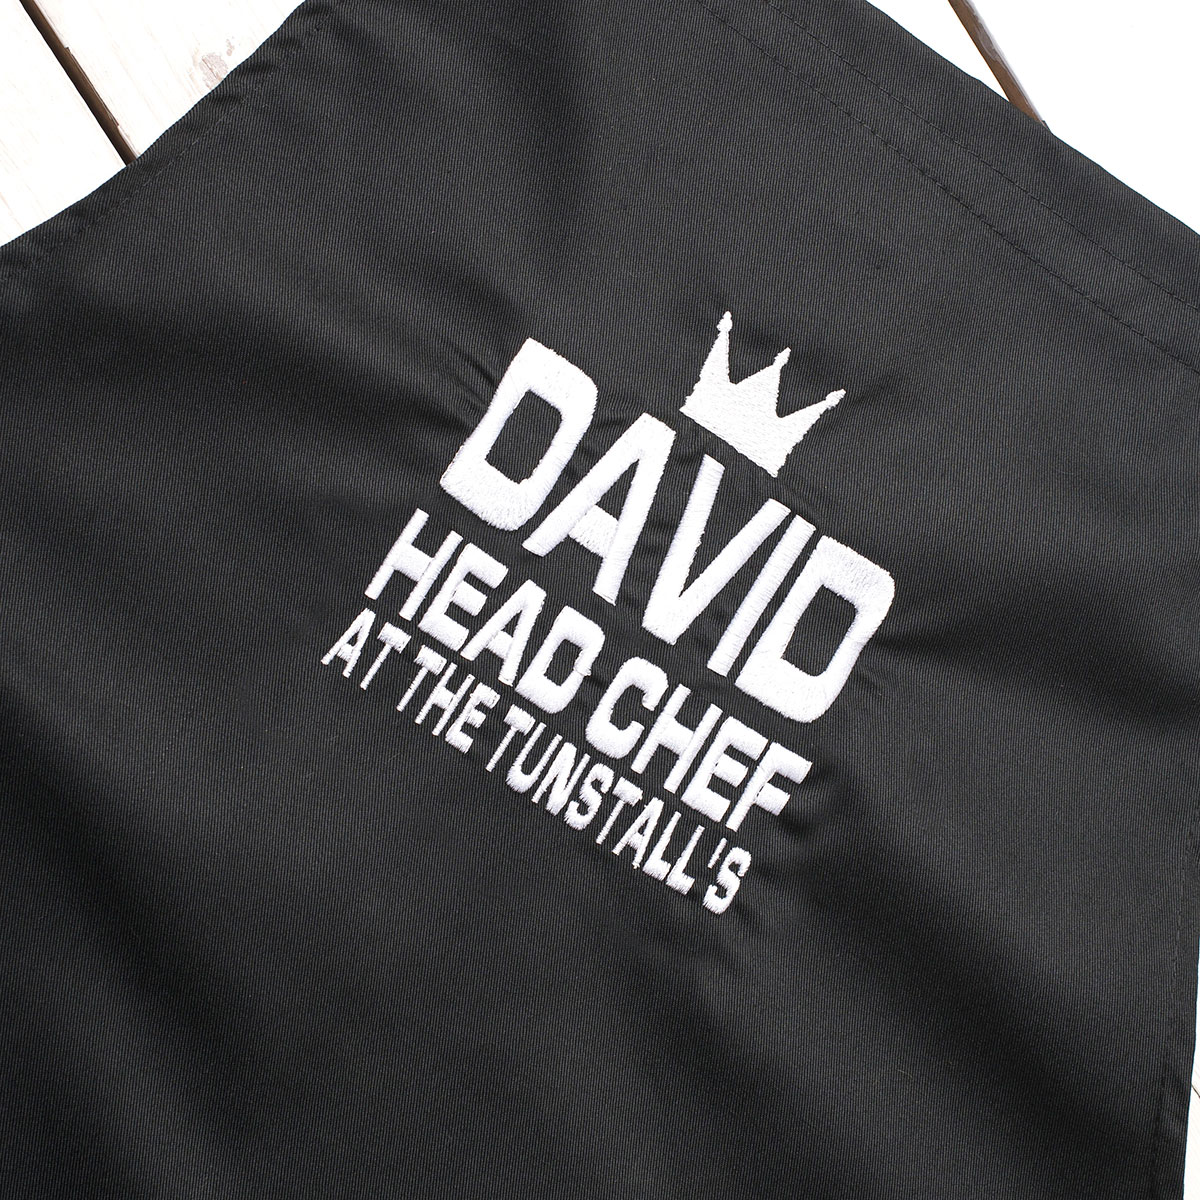 Personalised Apron - Head Chef At... 